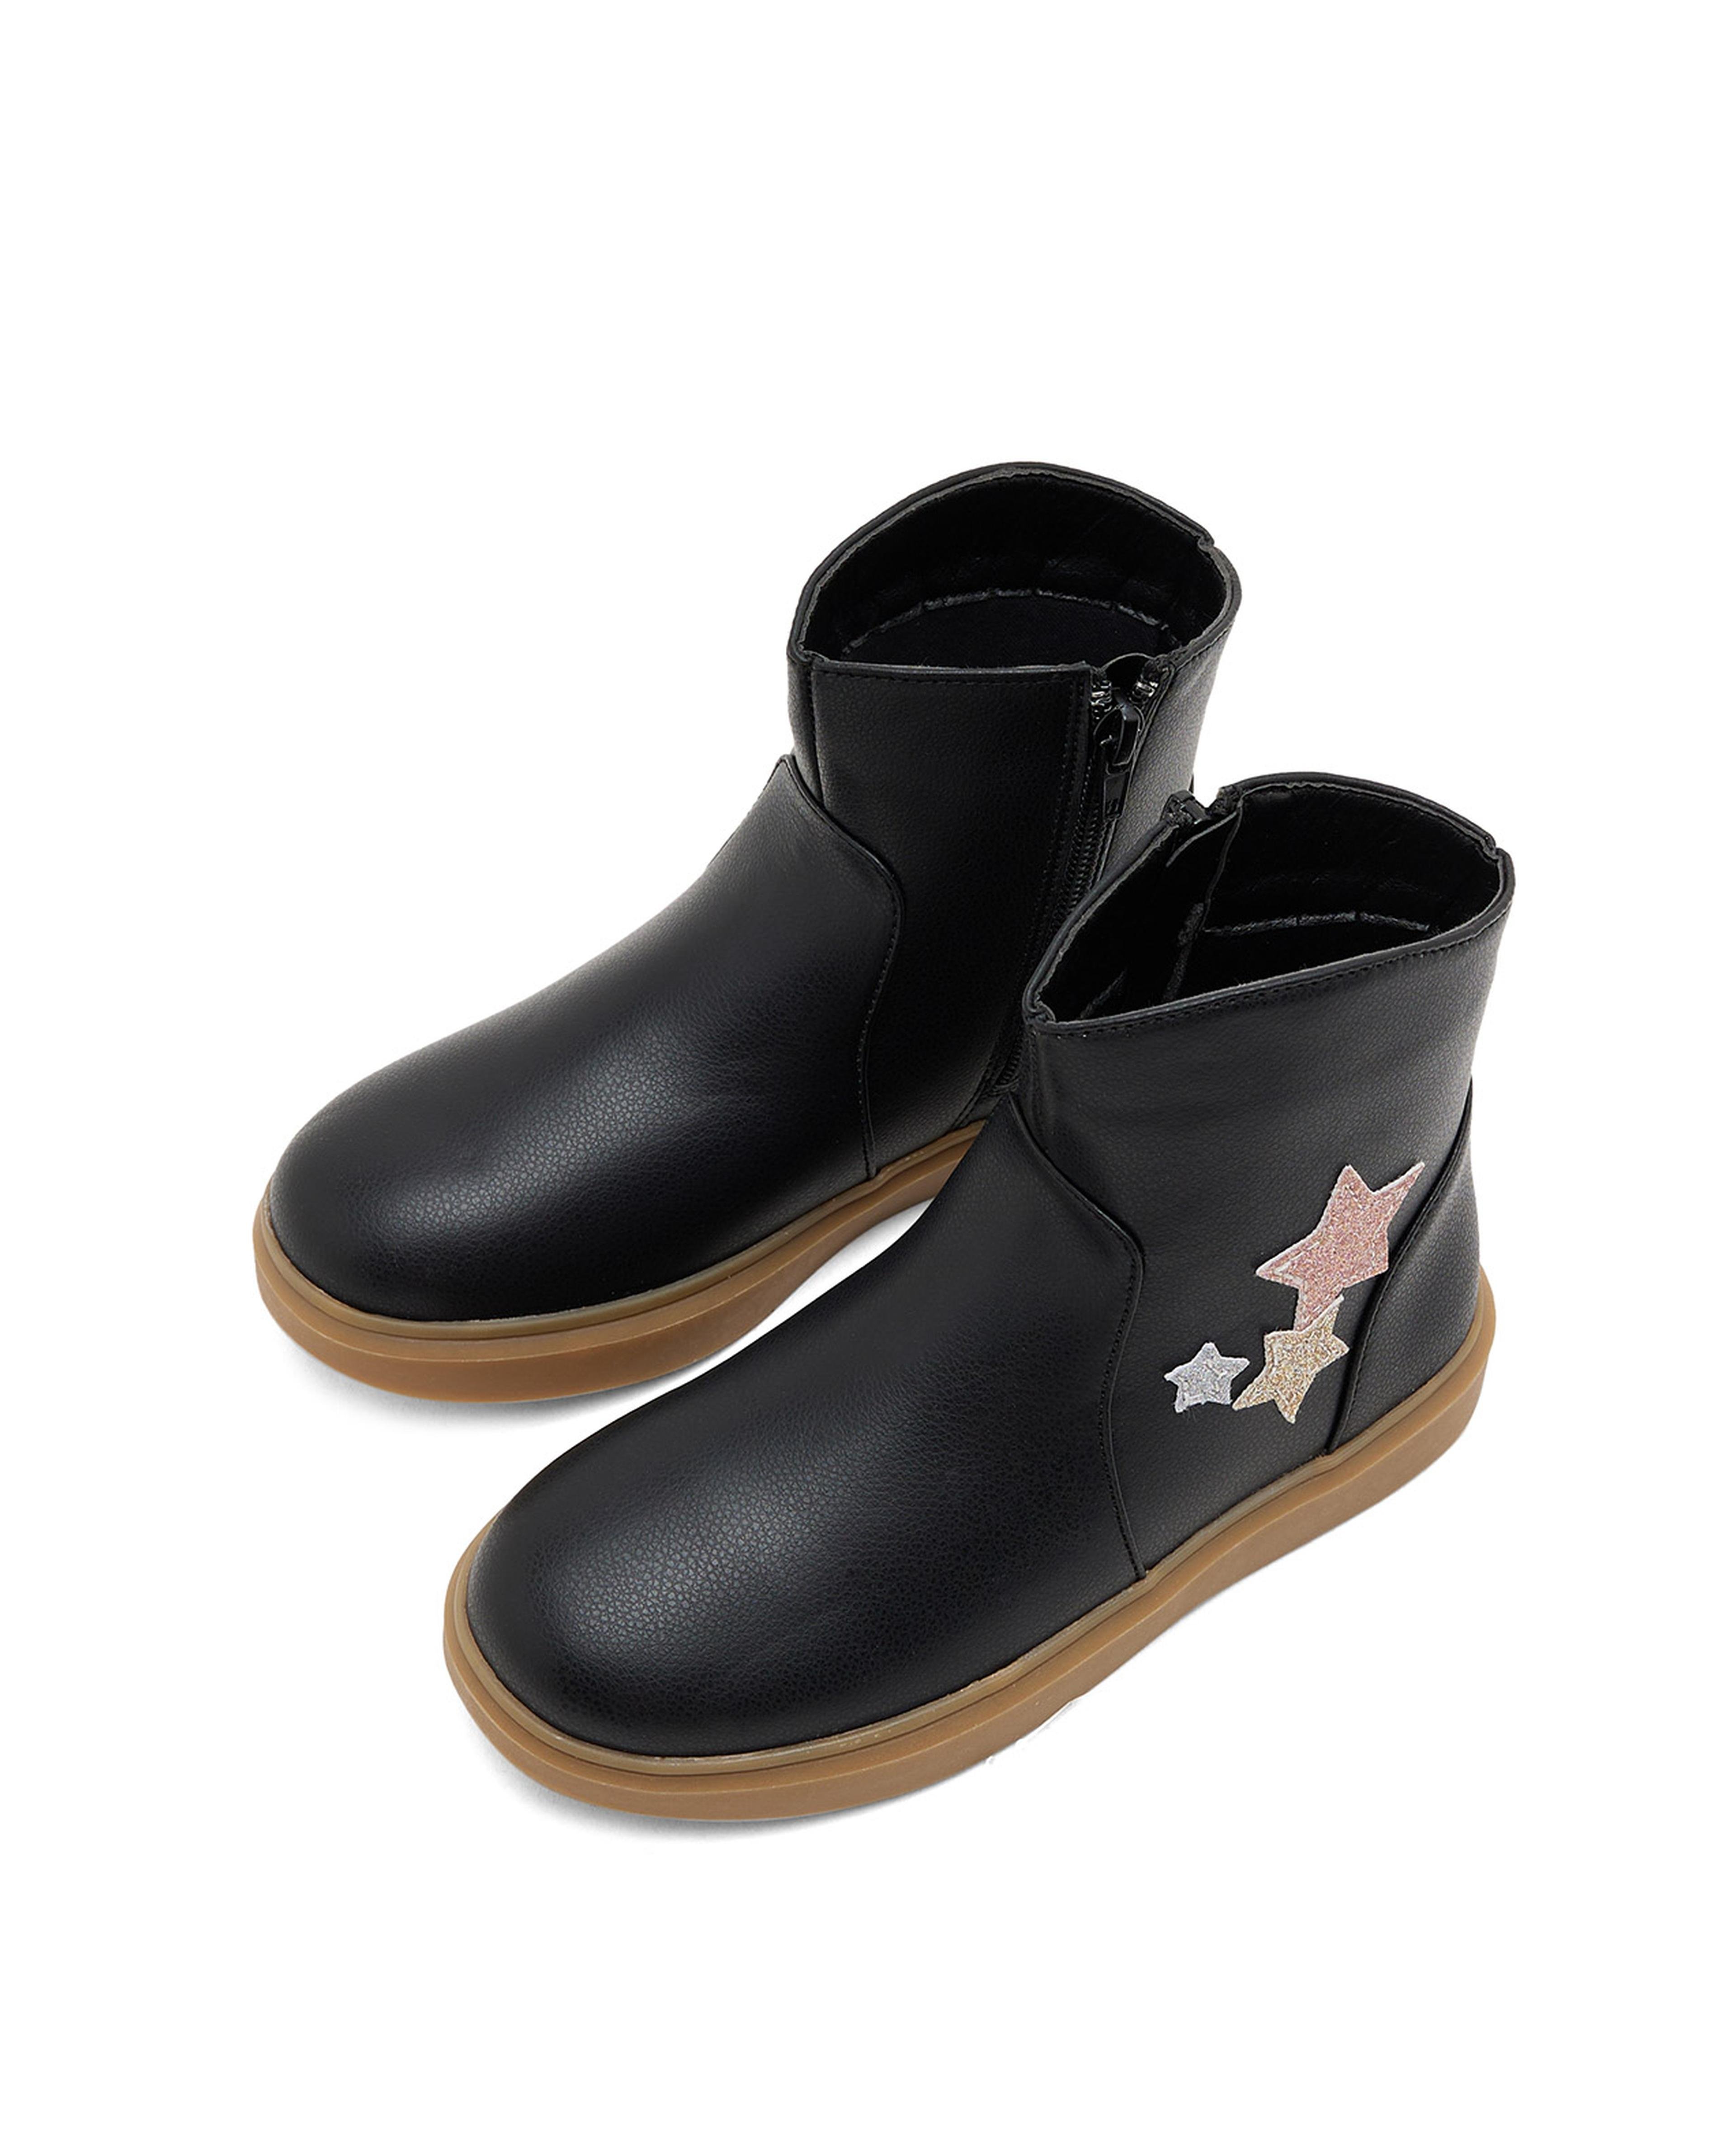 Star Applique Ankle Boots